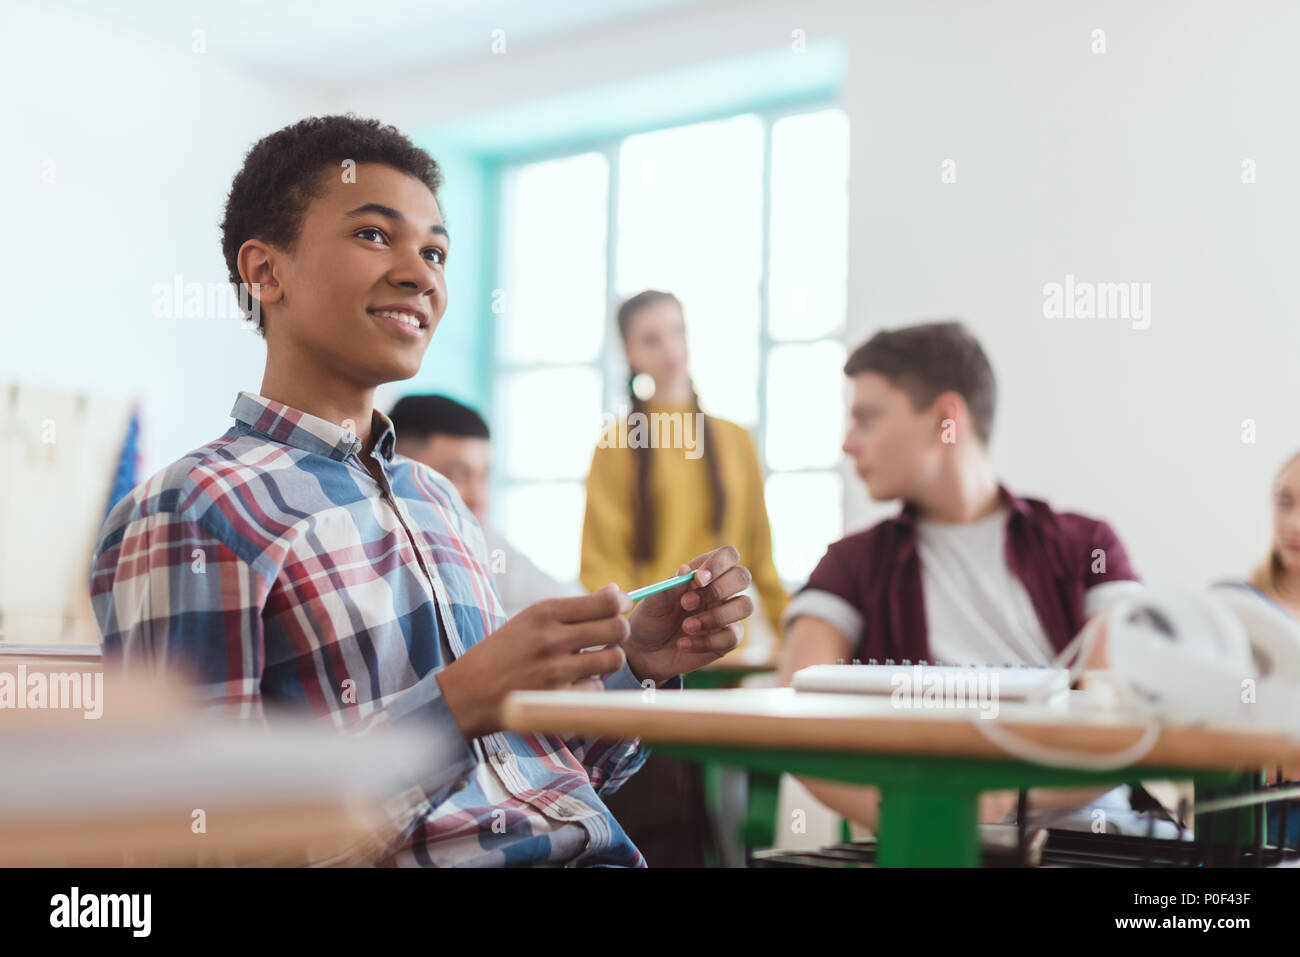 Low angle view of african american high school student holding pencil in hand and classmates sitting behind Stock Photo